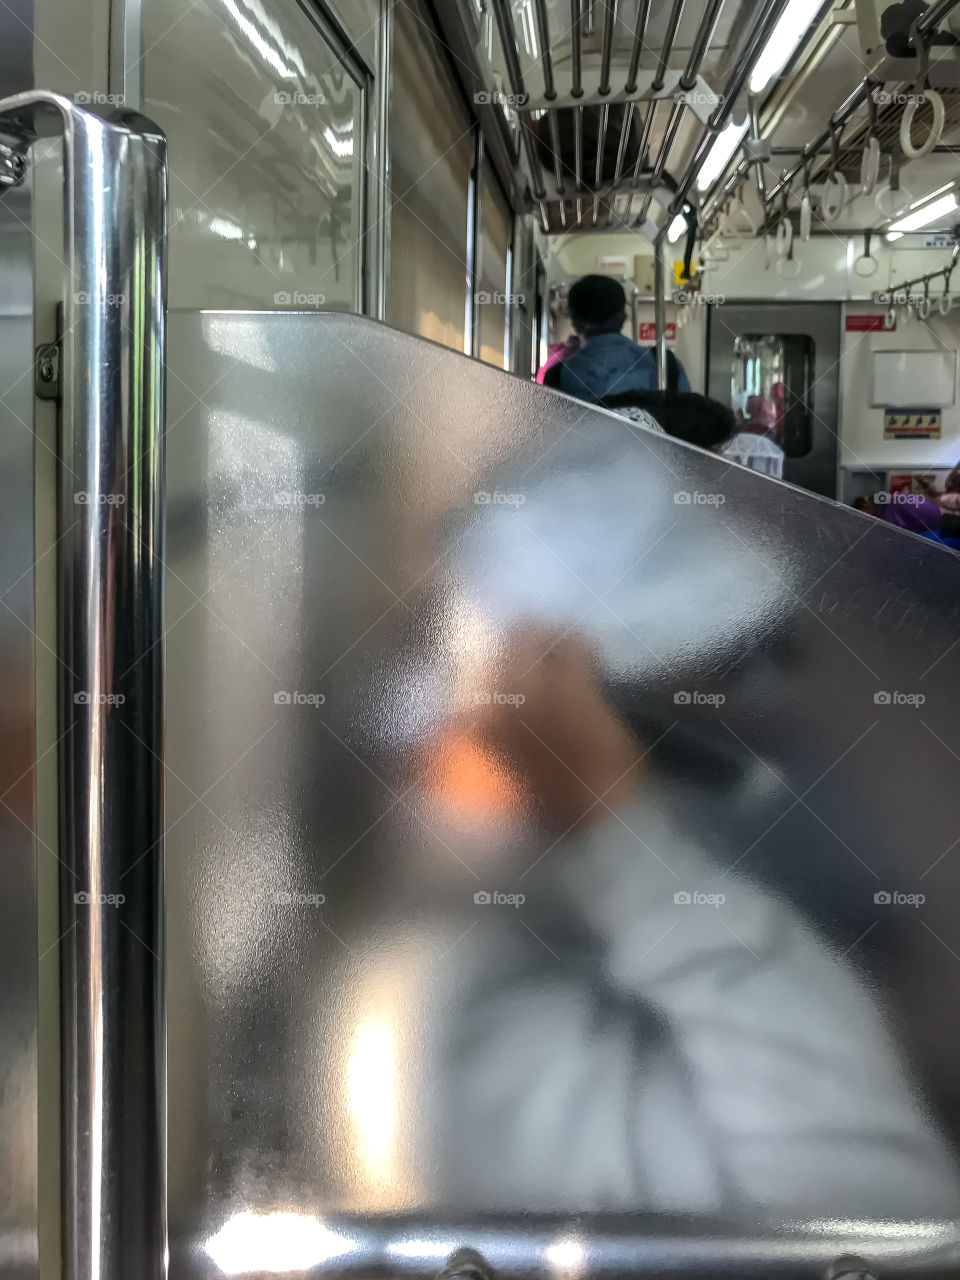 Jakarta, Indonesia; this is the rare view of city train in the city, usually there is no rush hours, every hours is a rush, always crowded but during pandemic, this kind of view is common, one passenger sitting on a corner